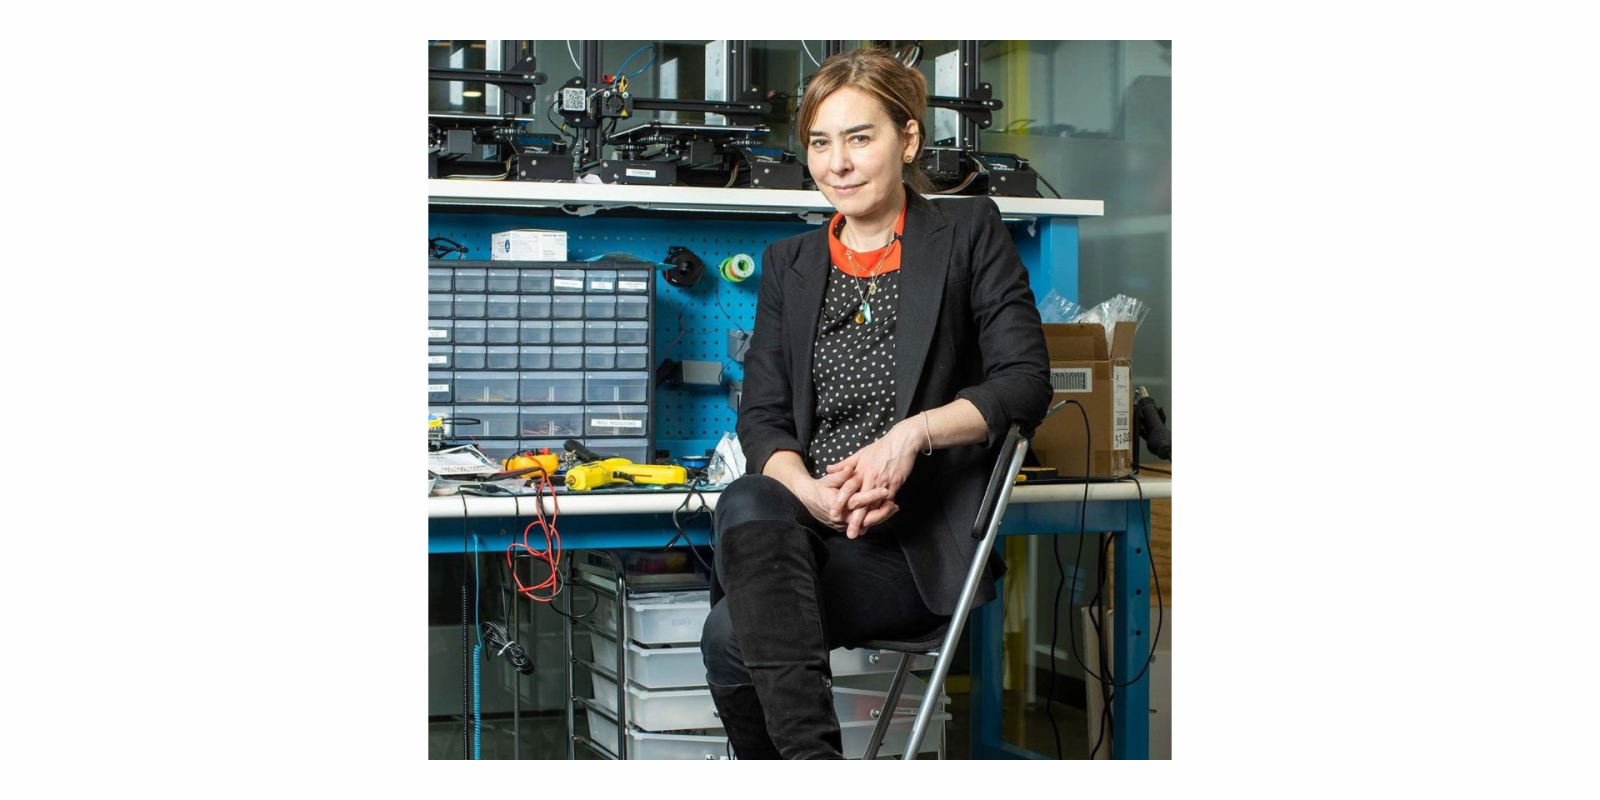 Woman sits in a dark jacket inside of a workspace filled with tools and machines